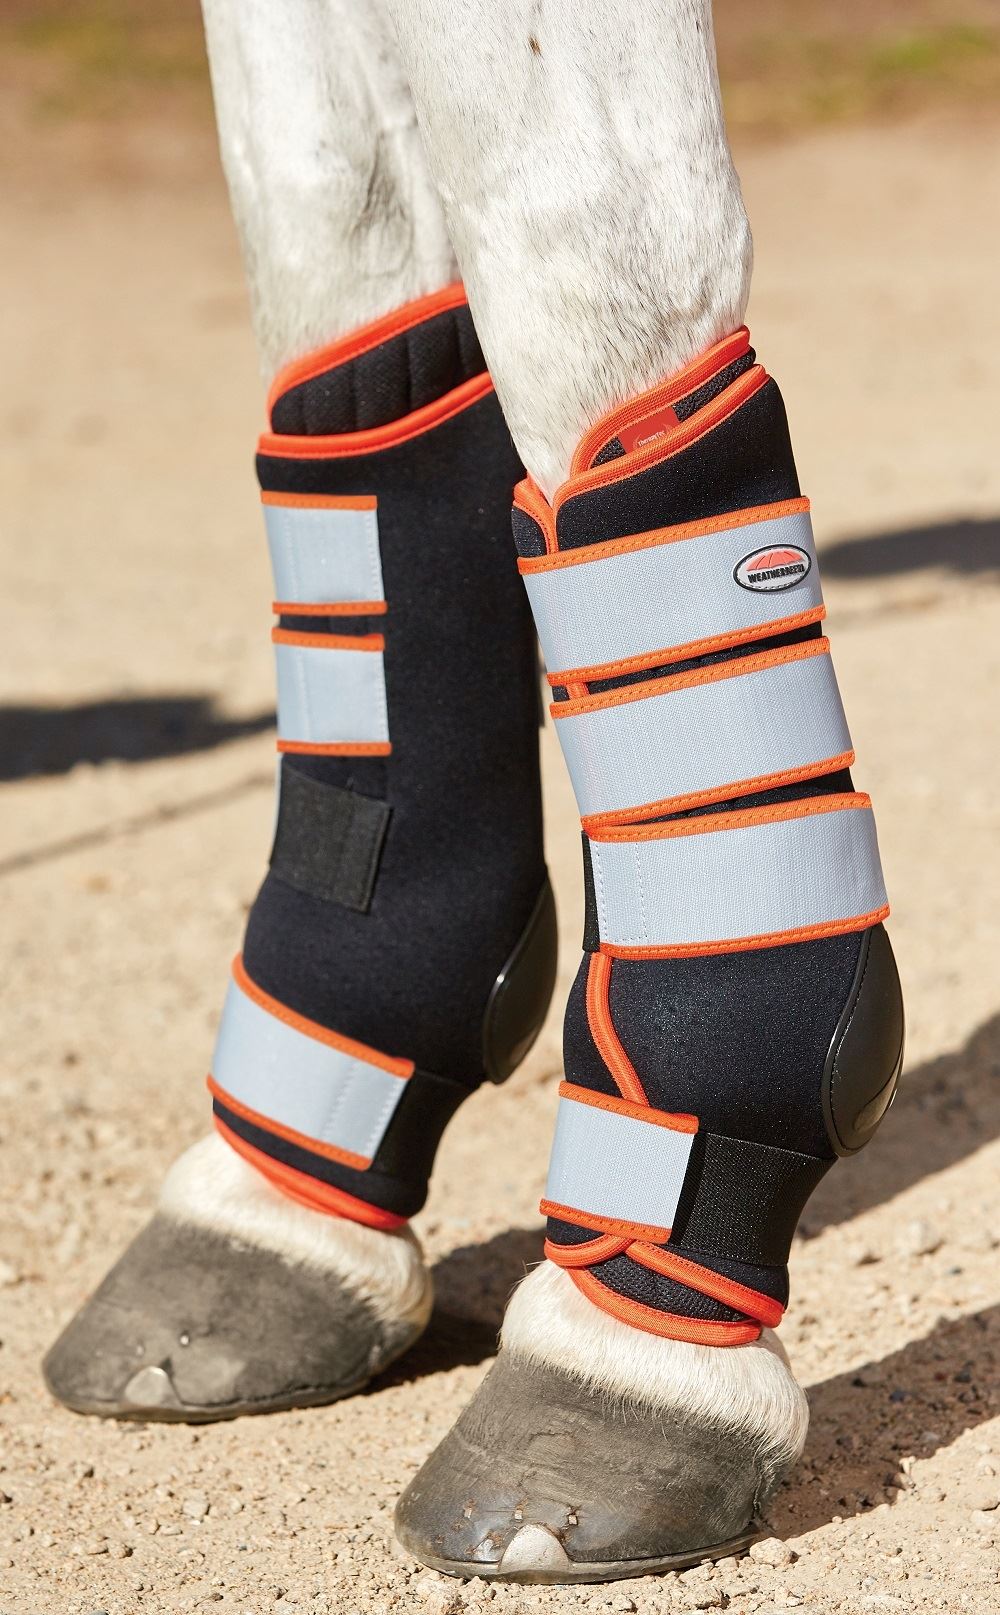 Weatherbeeta Therapy-Tec Stable Boot - Just Horse Riders